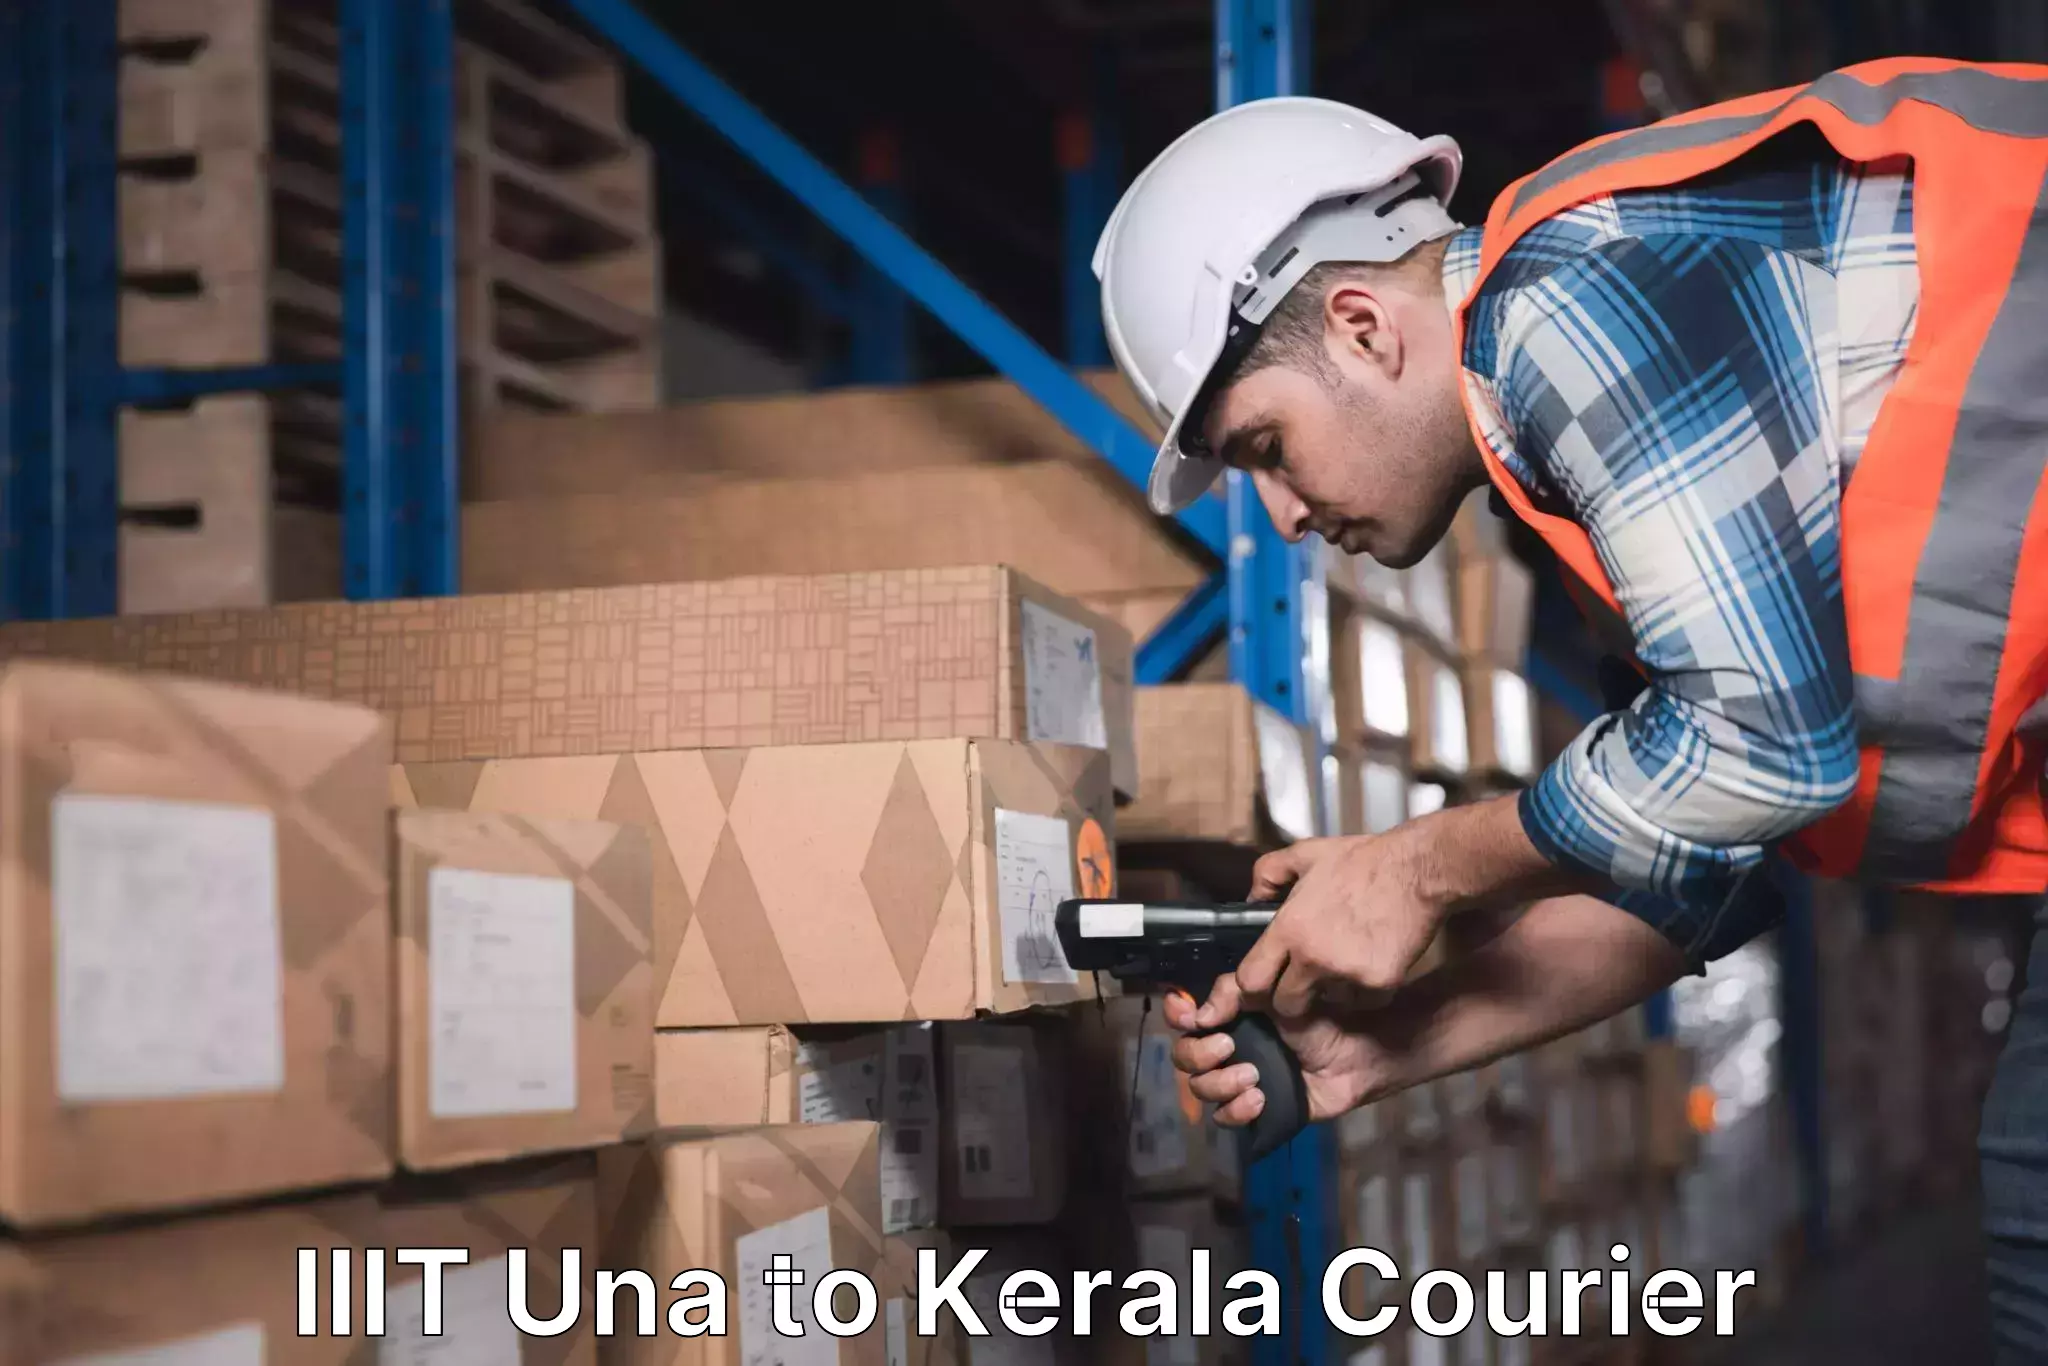 Courier insurance IIIT Una to Chengannur